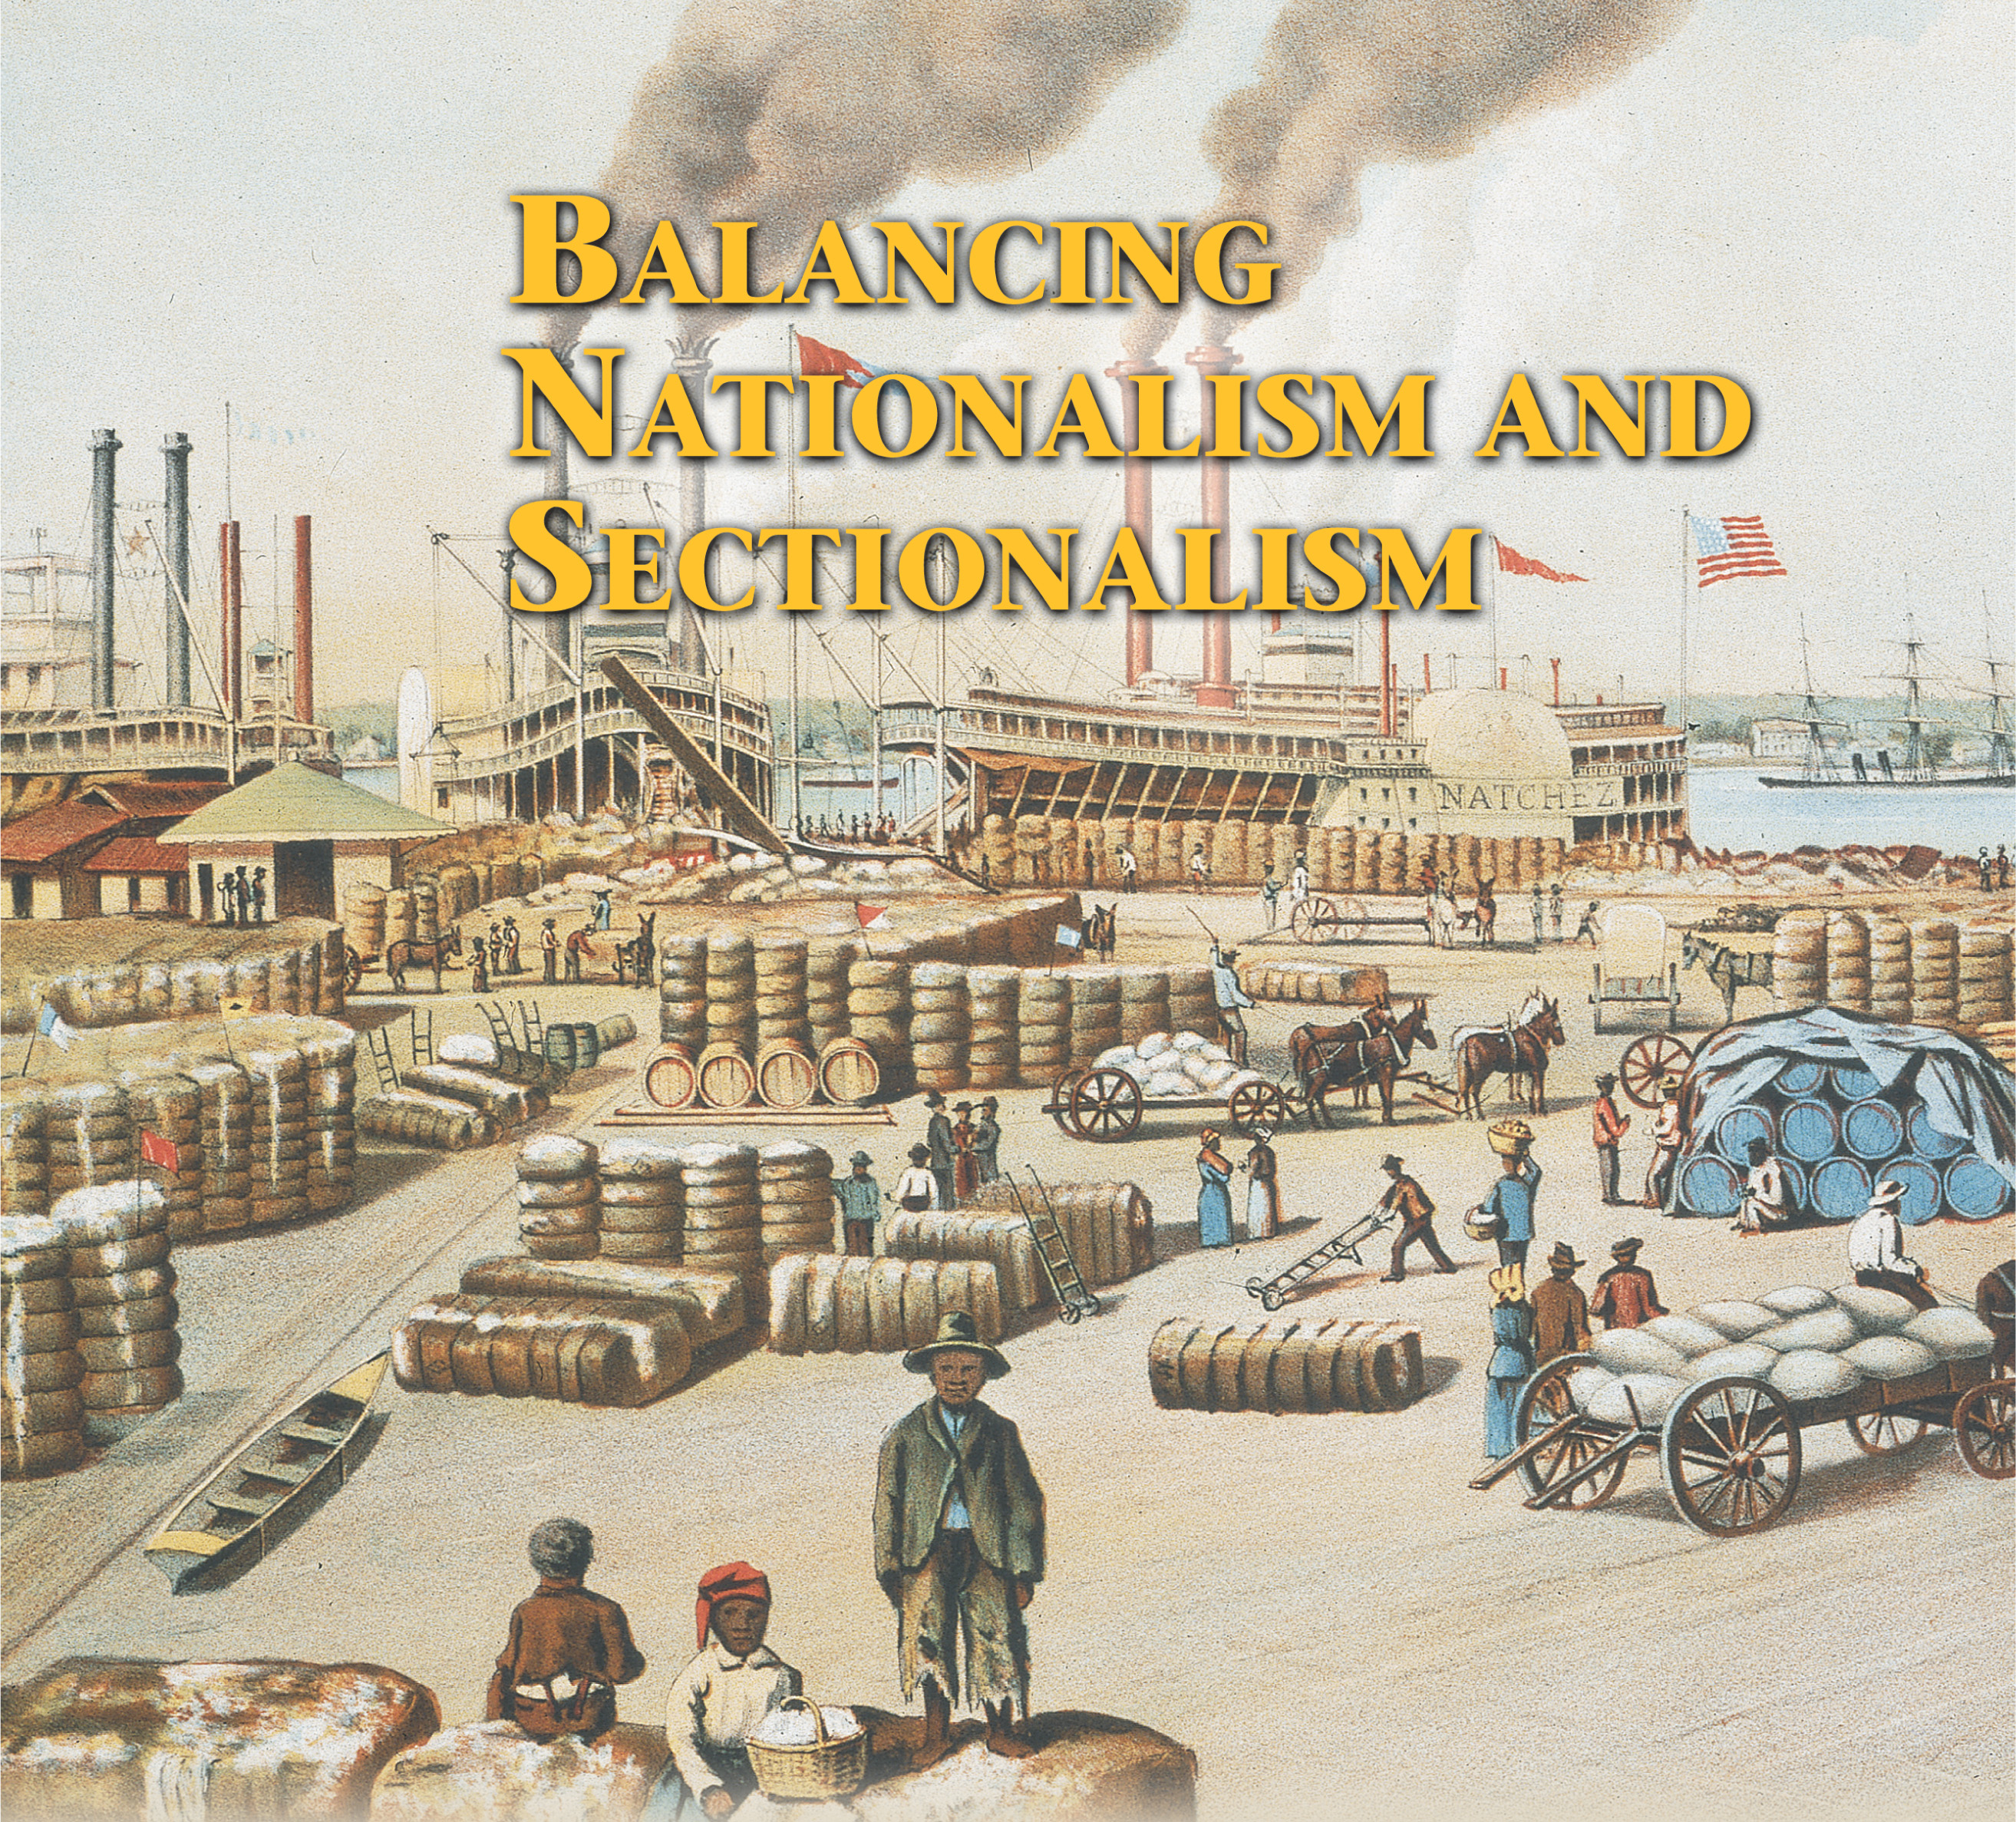 A painting shows cotton
bales stacked on a wharf. A title reads Balancing Nationalism and Socialism.